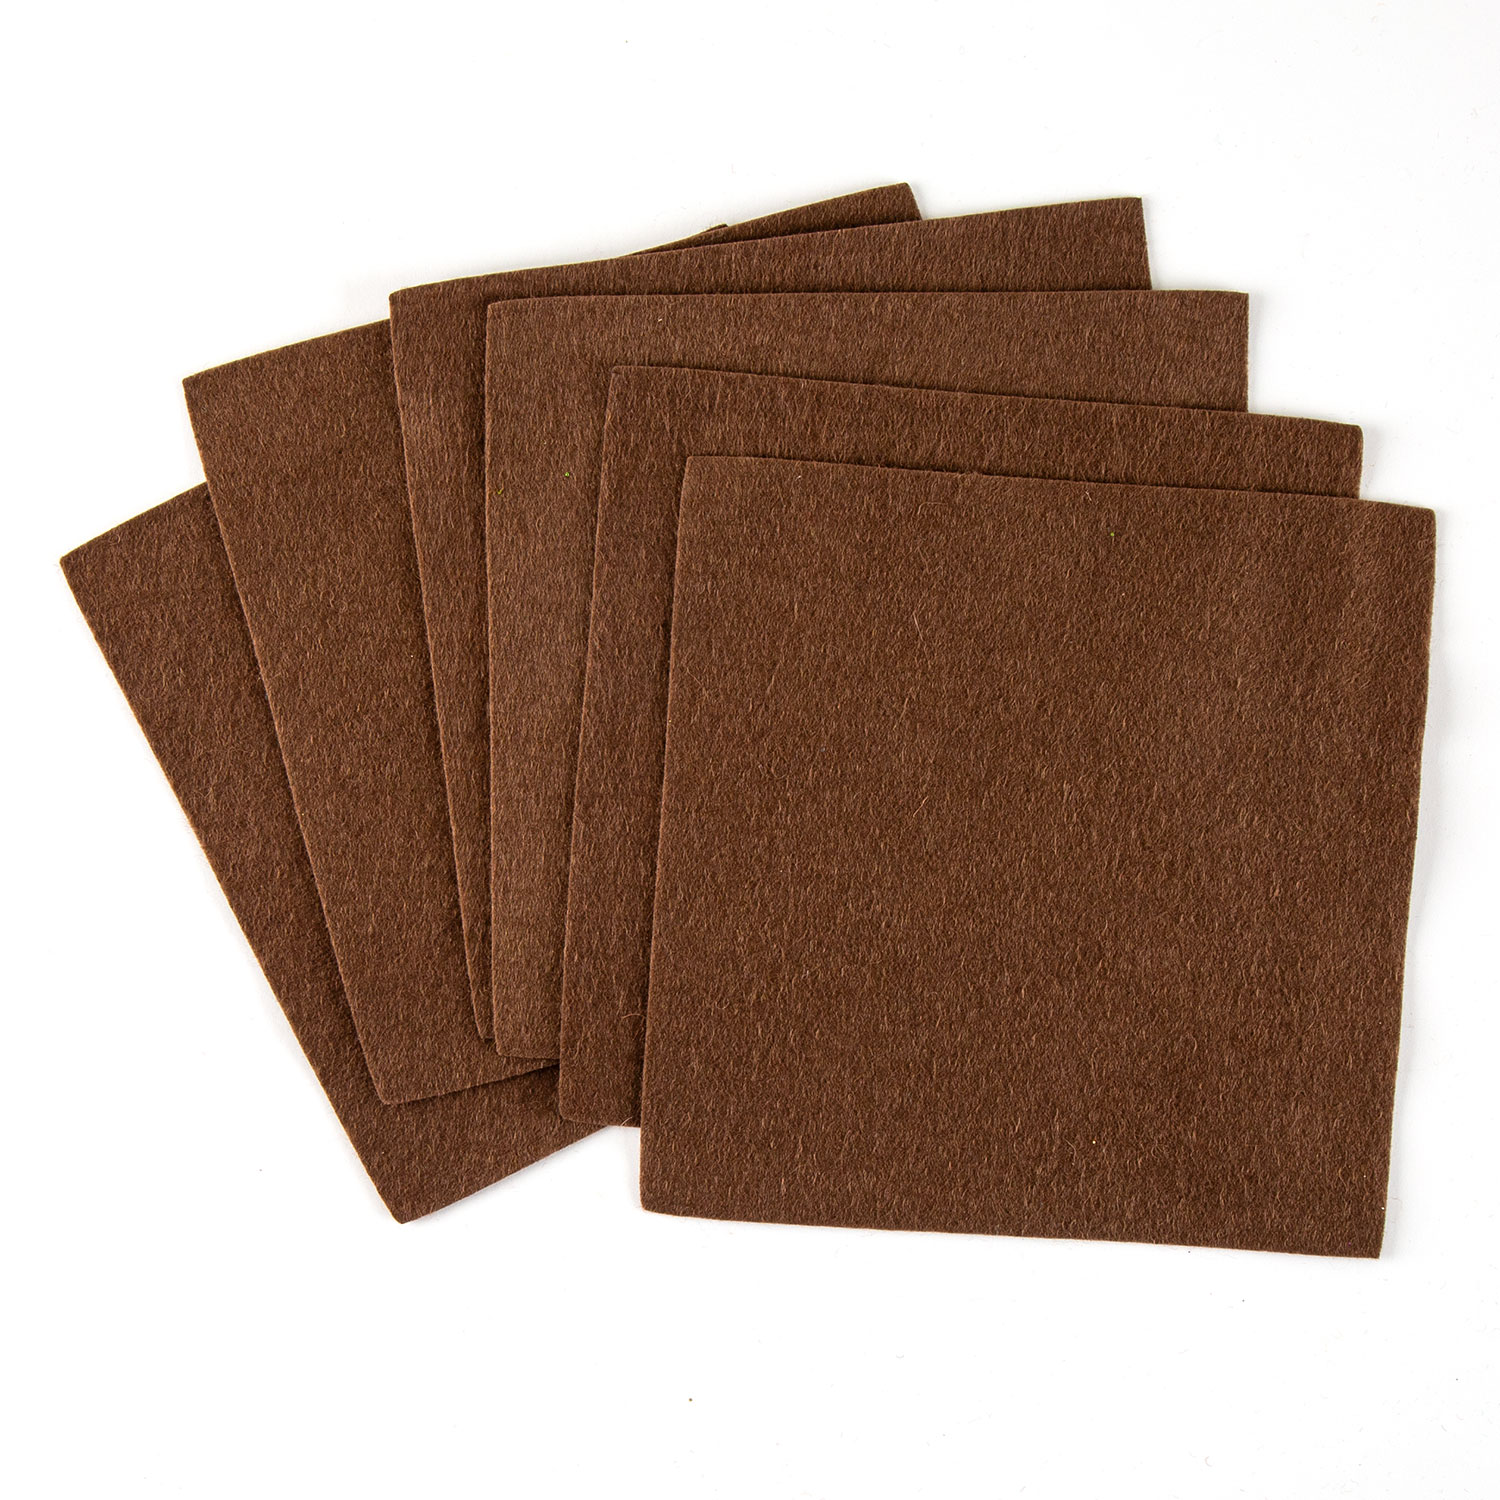 Felt by Clarity Pack of 6 Tile Backers 6x6" Non Adhesive Felt Pick N Mix - Pick any 2 - Oak